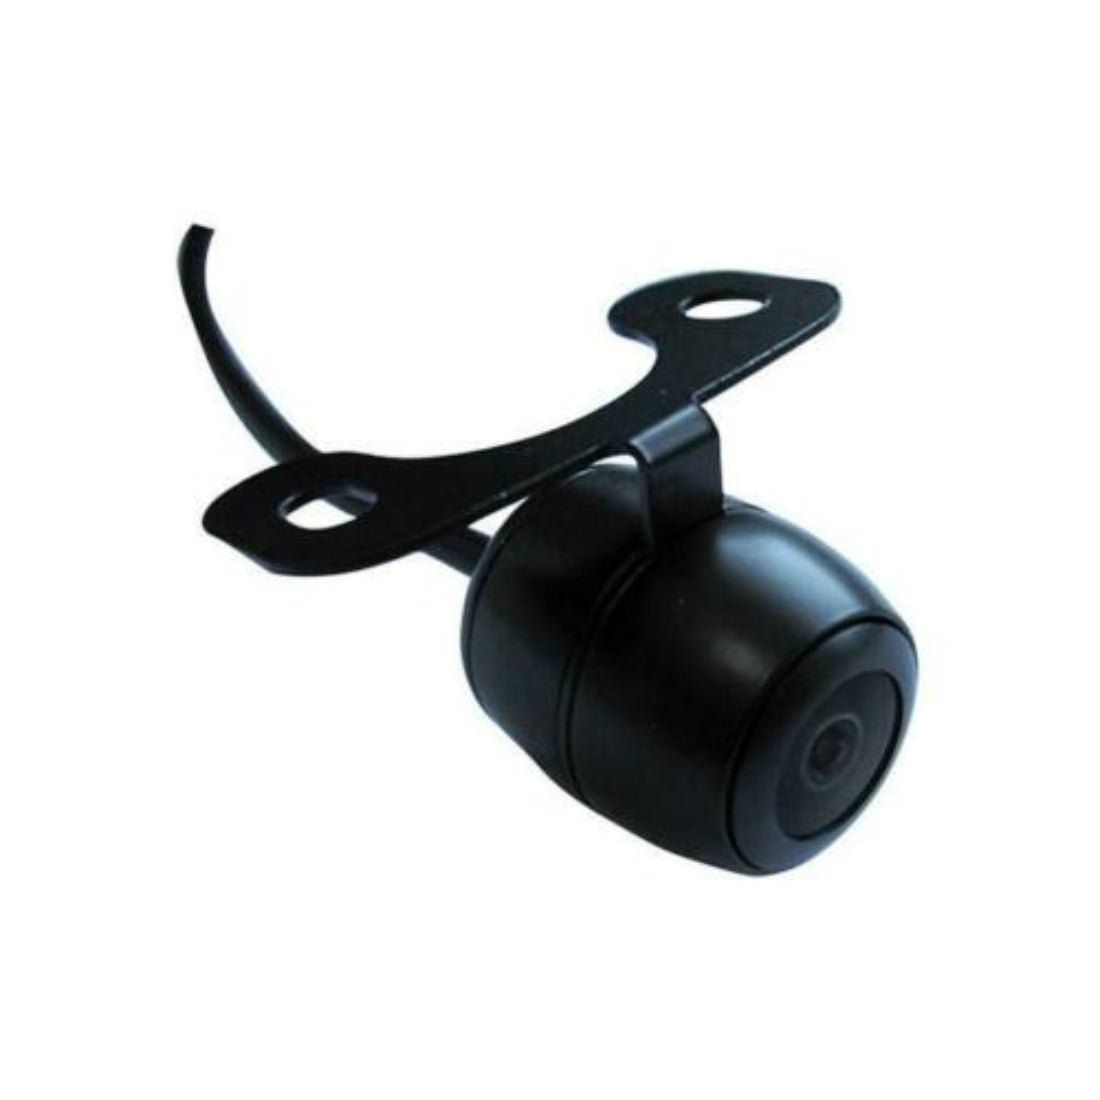 TView T225NV High Definition Rear-View Back-Up Camera w/ Night Vision